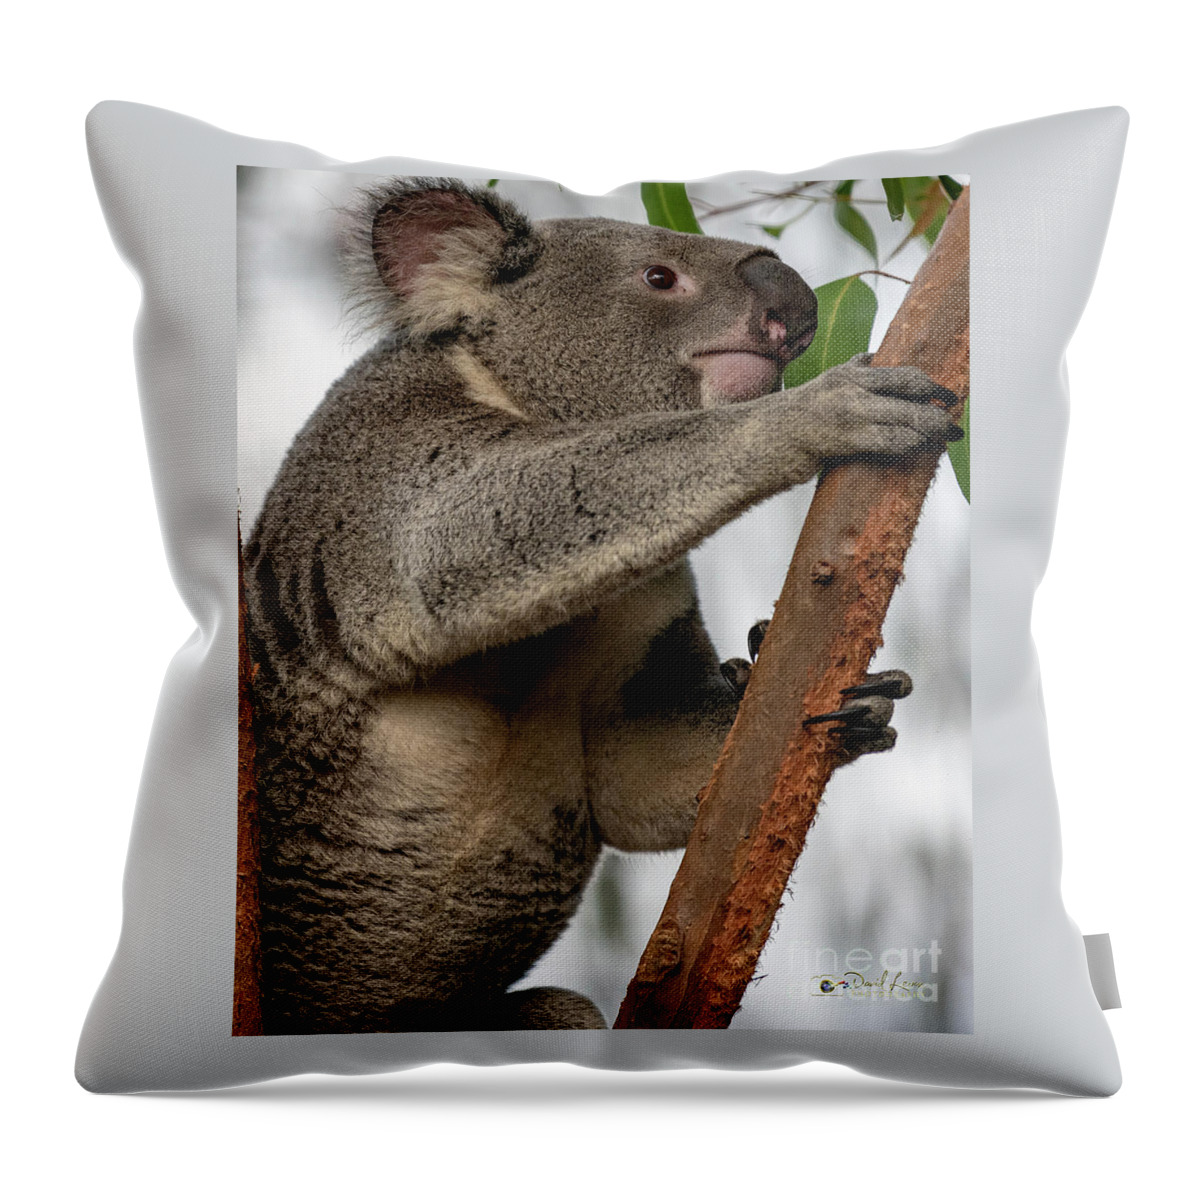 San Diego Zoo Throw Pillow featuring the photograph Going Up by David Levin